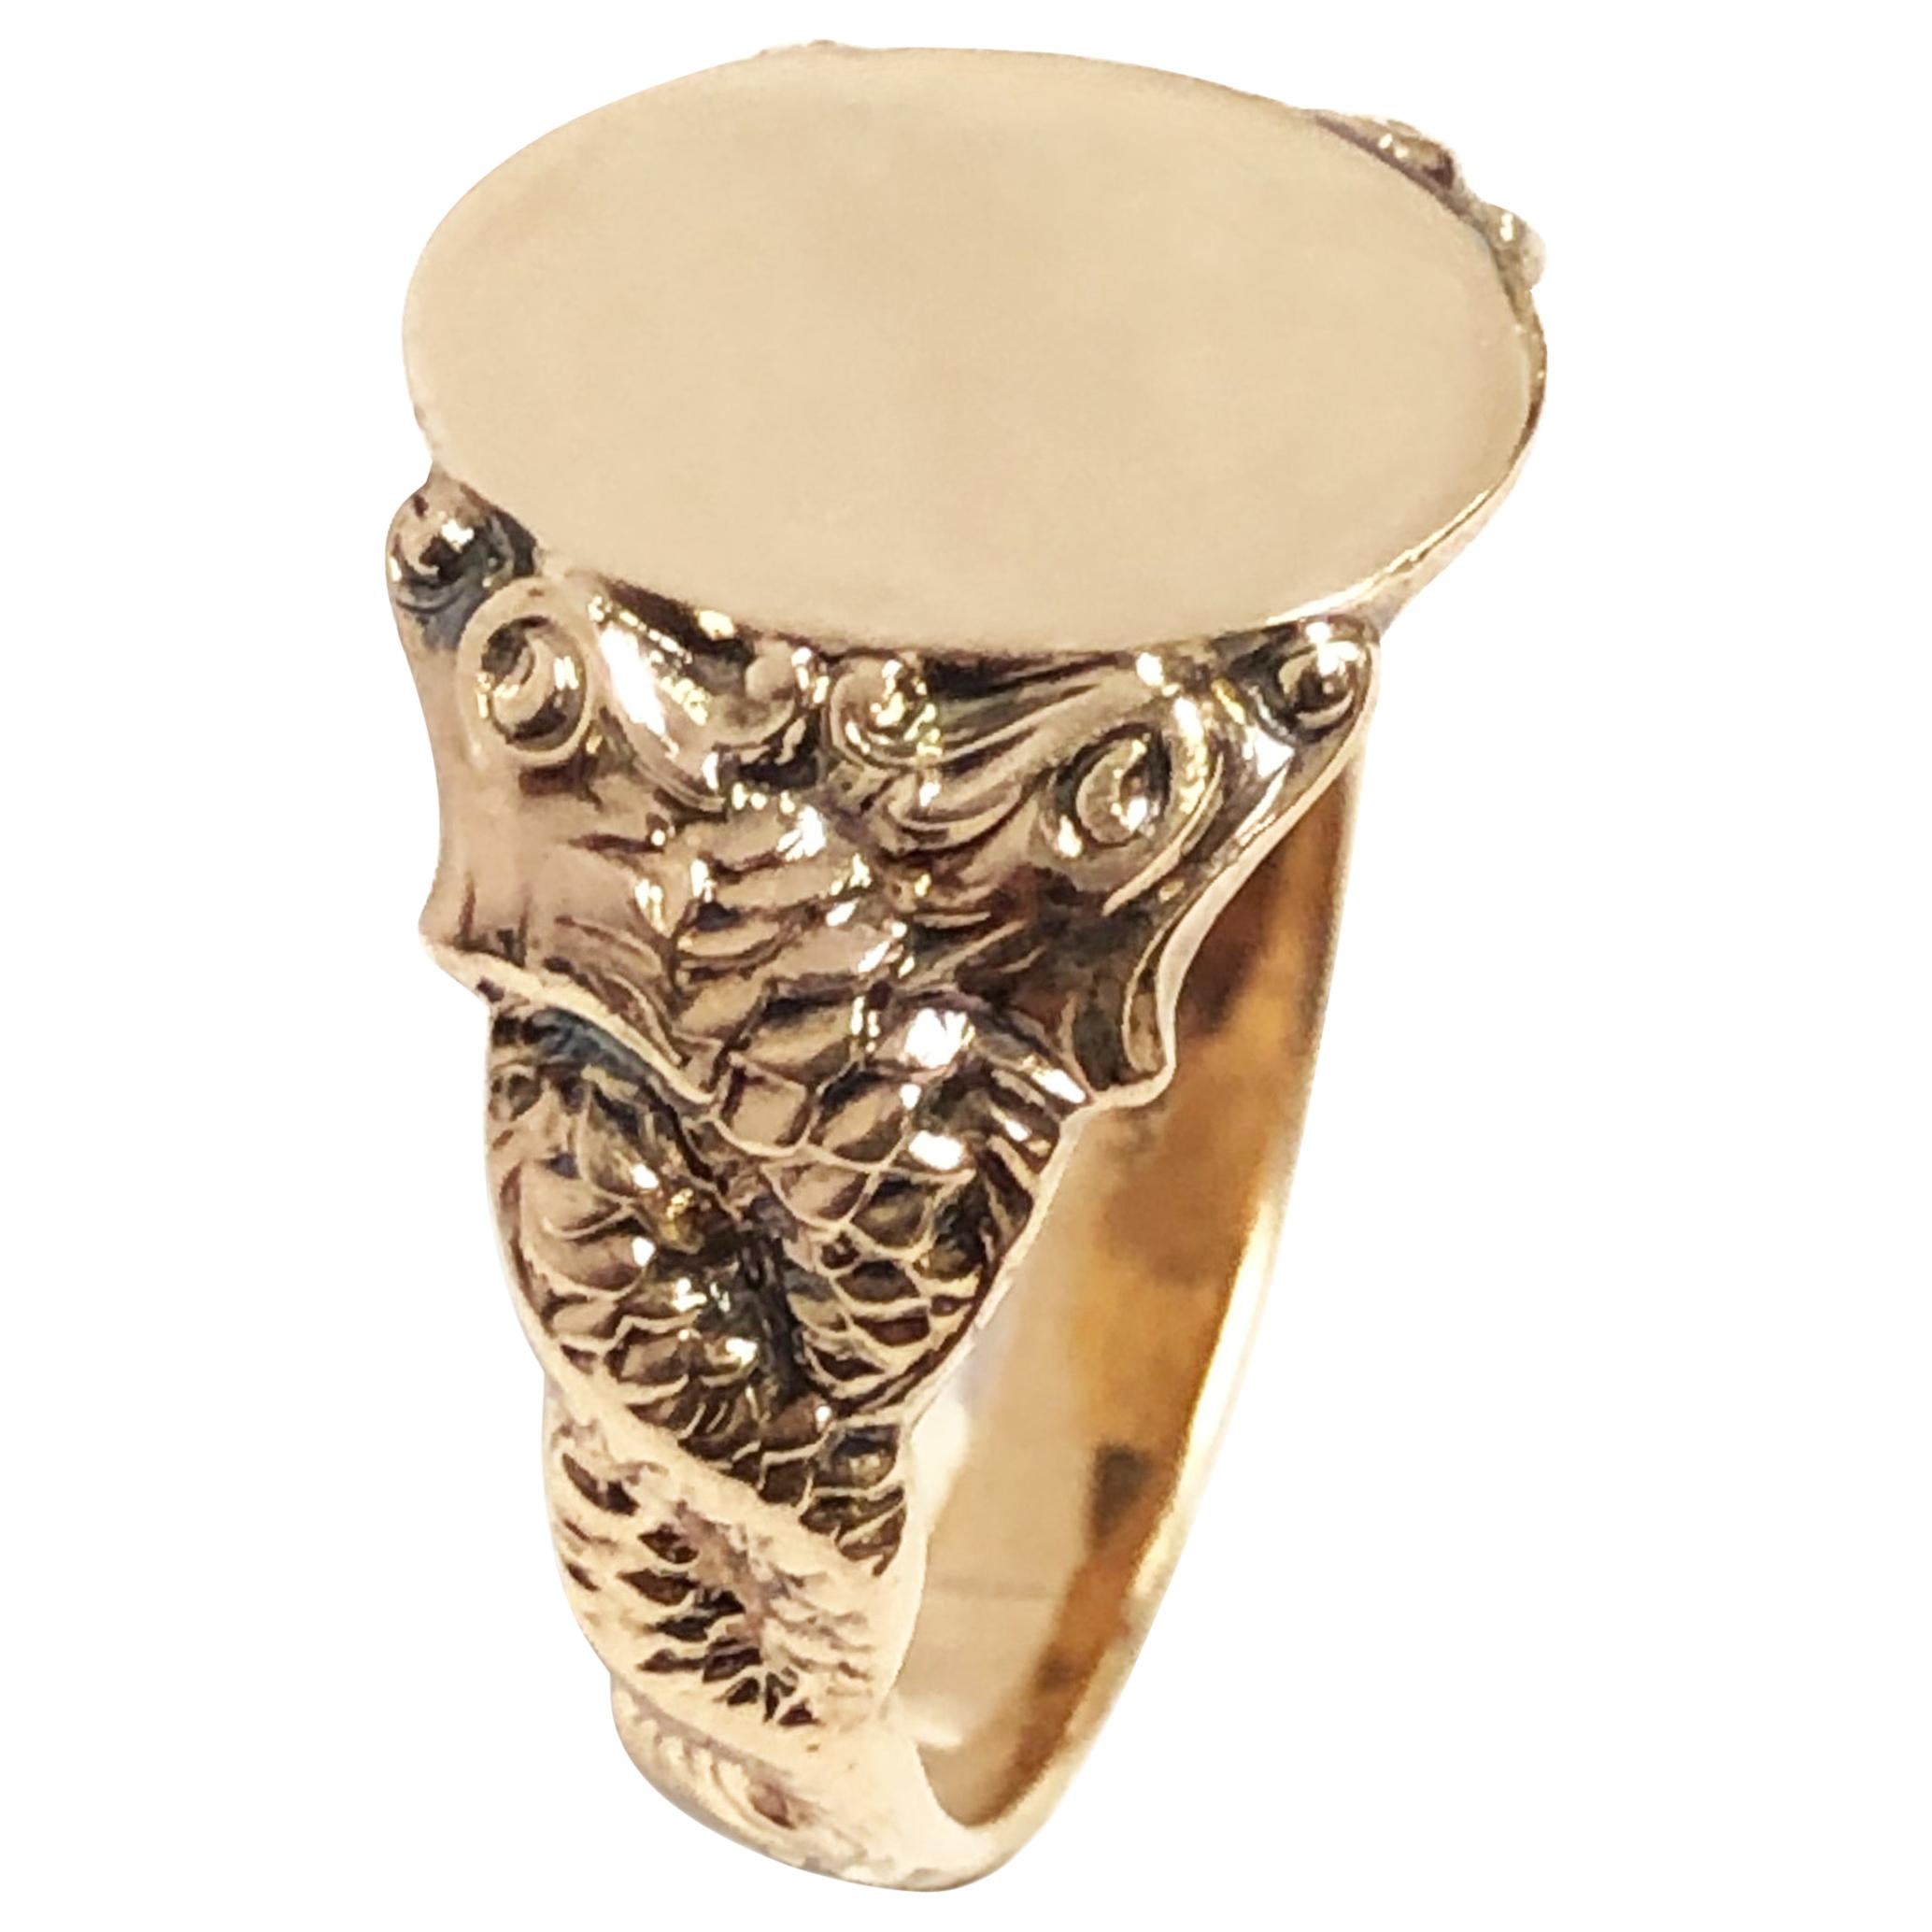 What is the history of a signet ring?